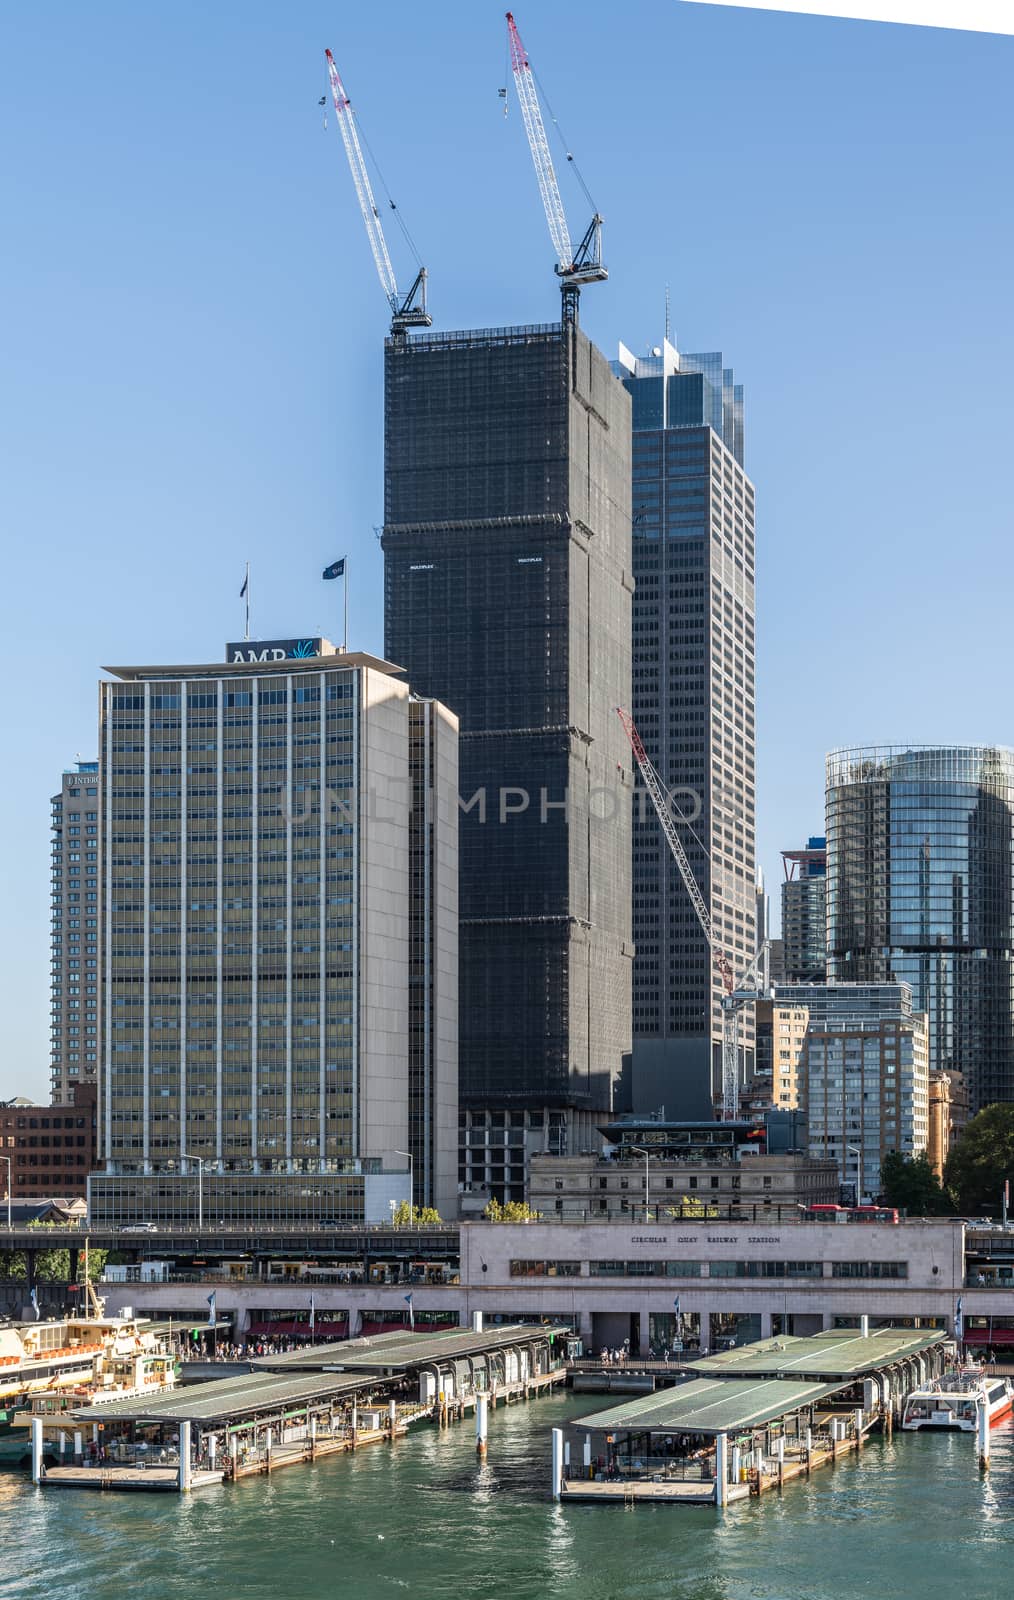 Sydney, Australia - February 12, 2019: Part of ferry terminal and Circular Quay Railway Station plus skyline in back. Highrises under construction with cranes. Evening shot with light blue sky.